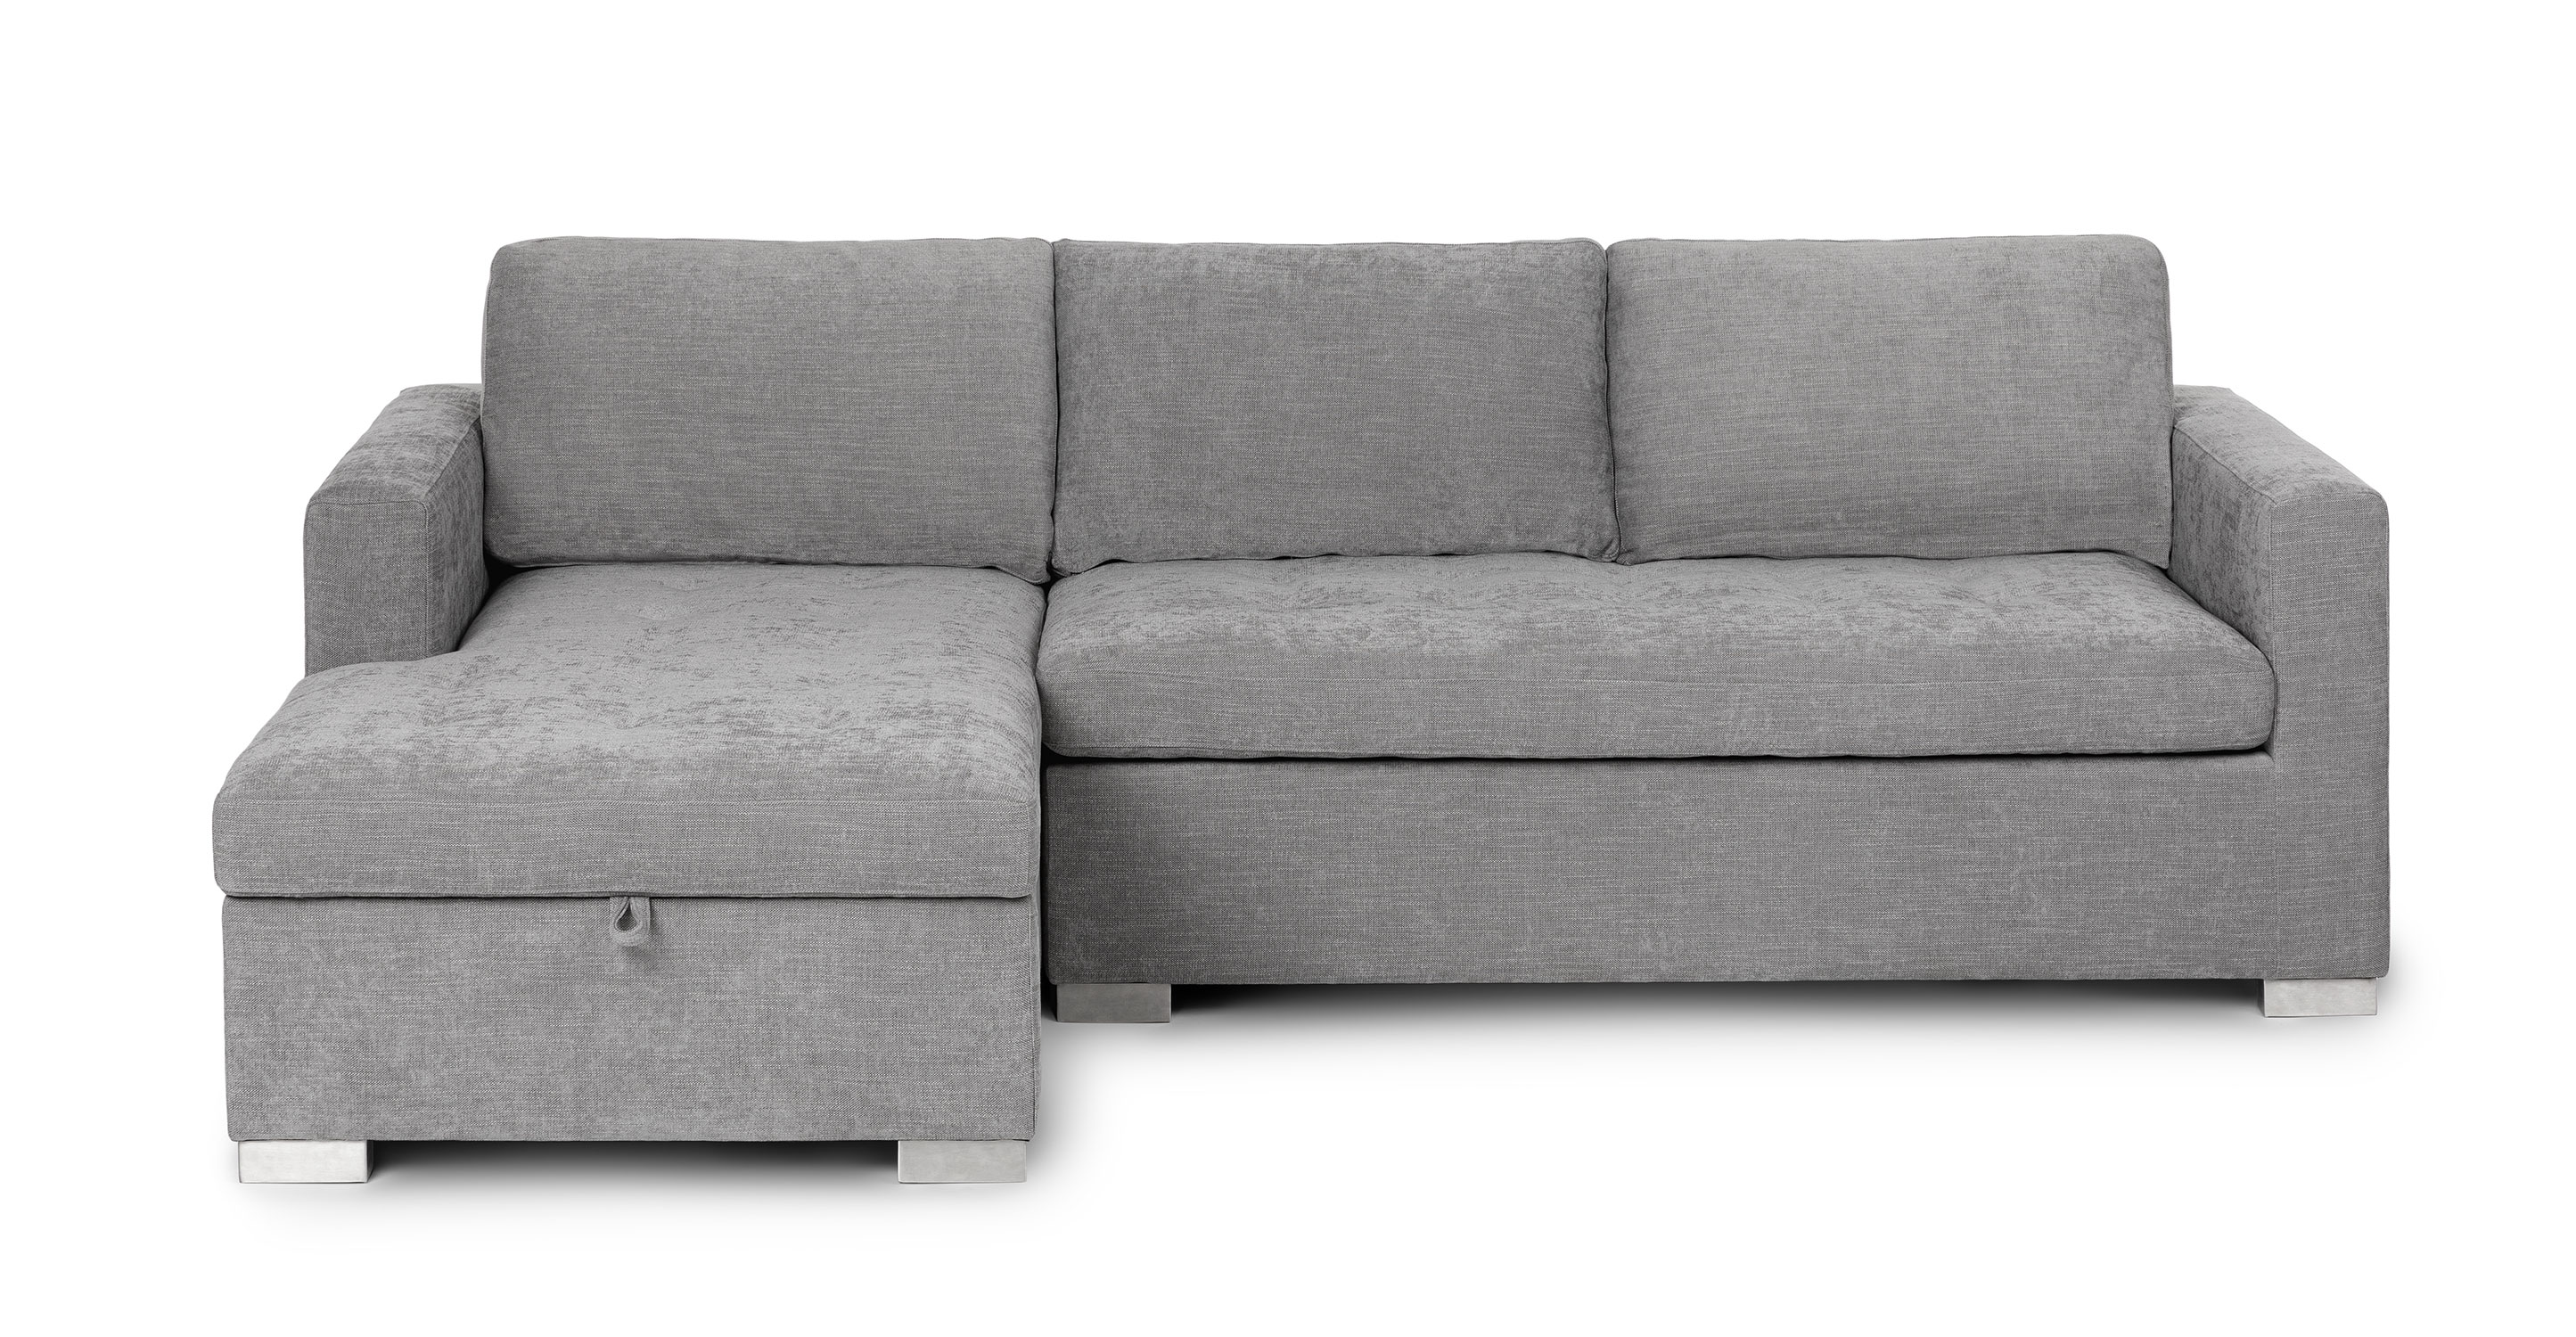 Dawn Gray Fabric Sectional Sofa Bed, Gerard Grey Sectional Sofa Bed With Queen Gel Memory Foam Mattress